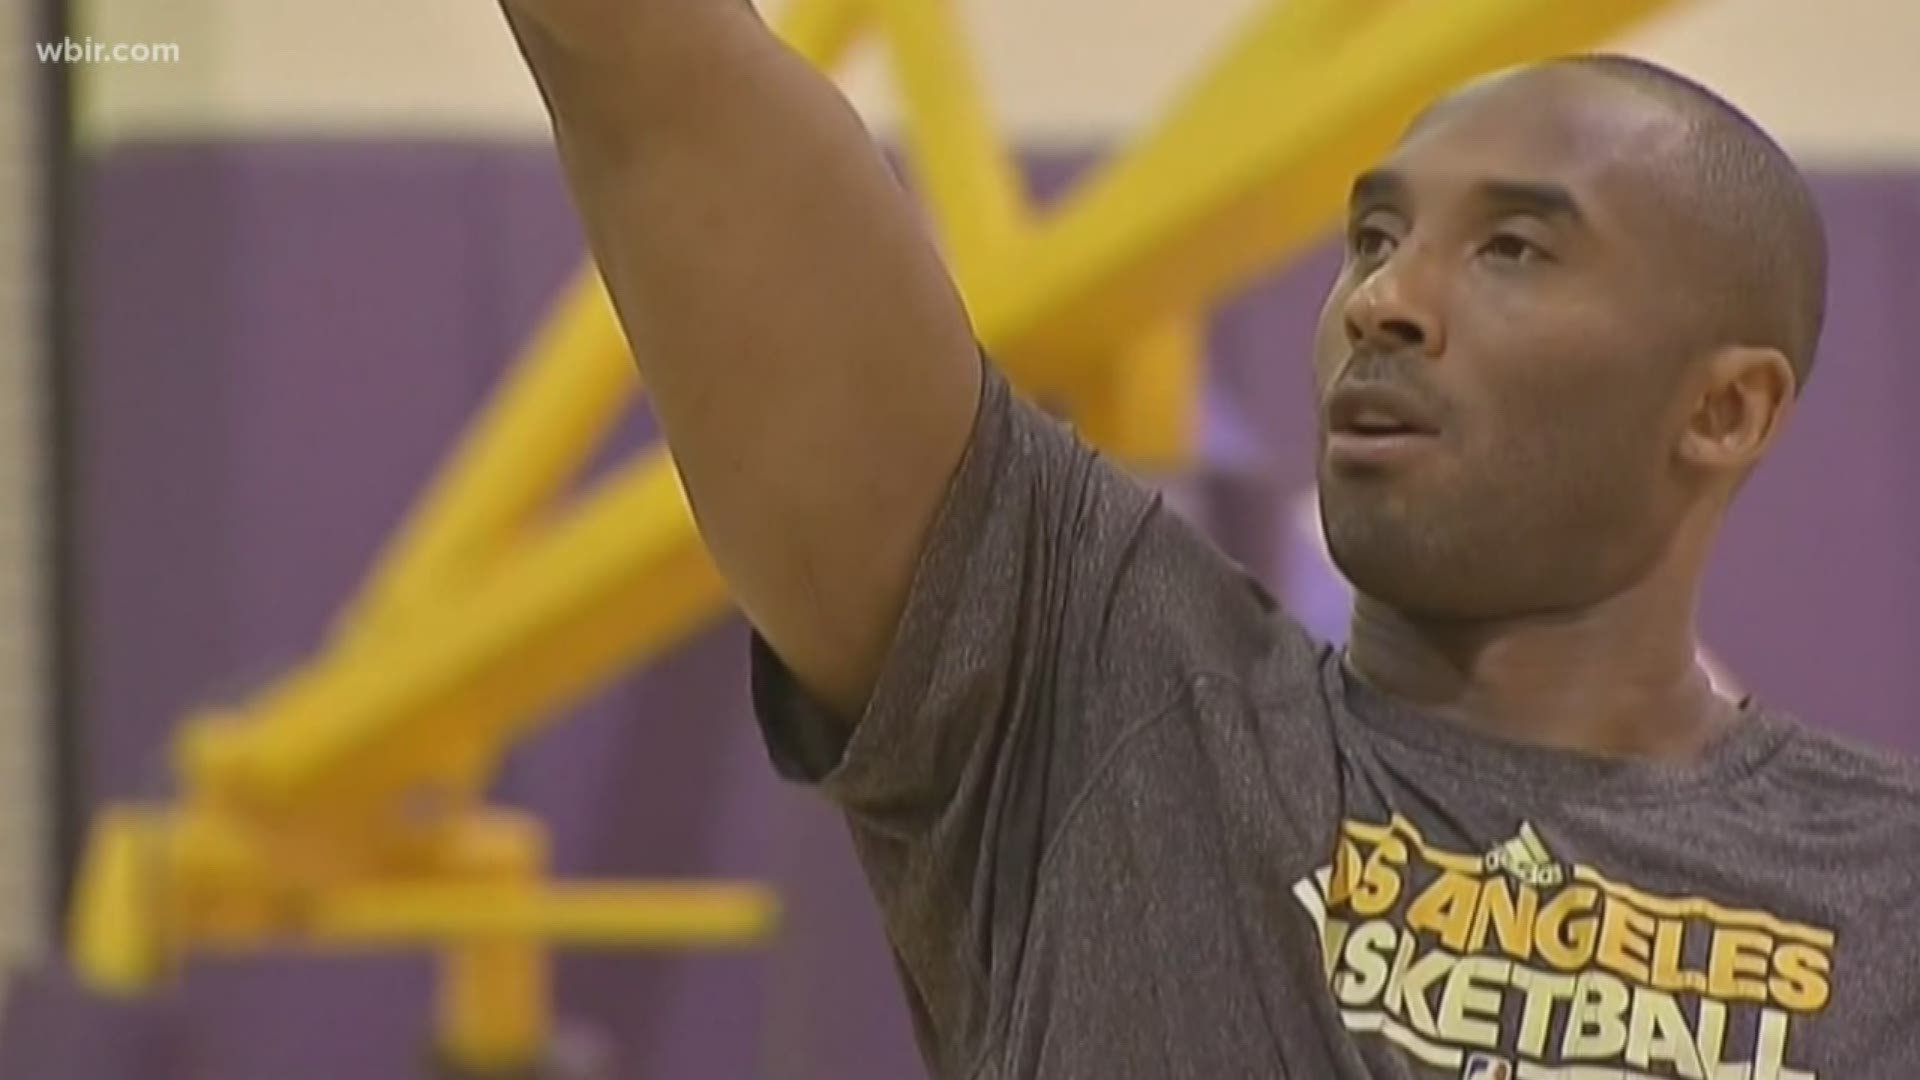 As people around the world remember Kobe Bryant -- many locally are talking about his impact on the game of basketball.